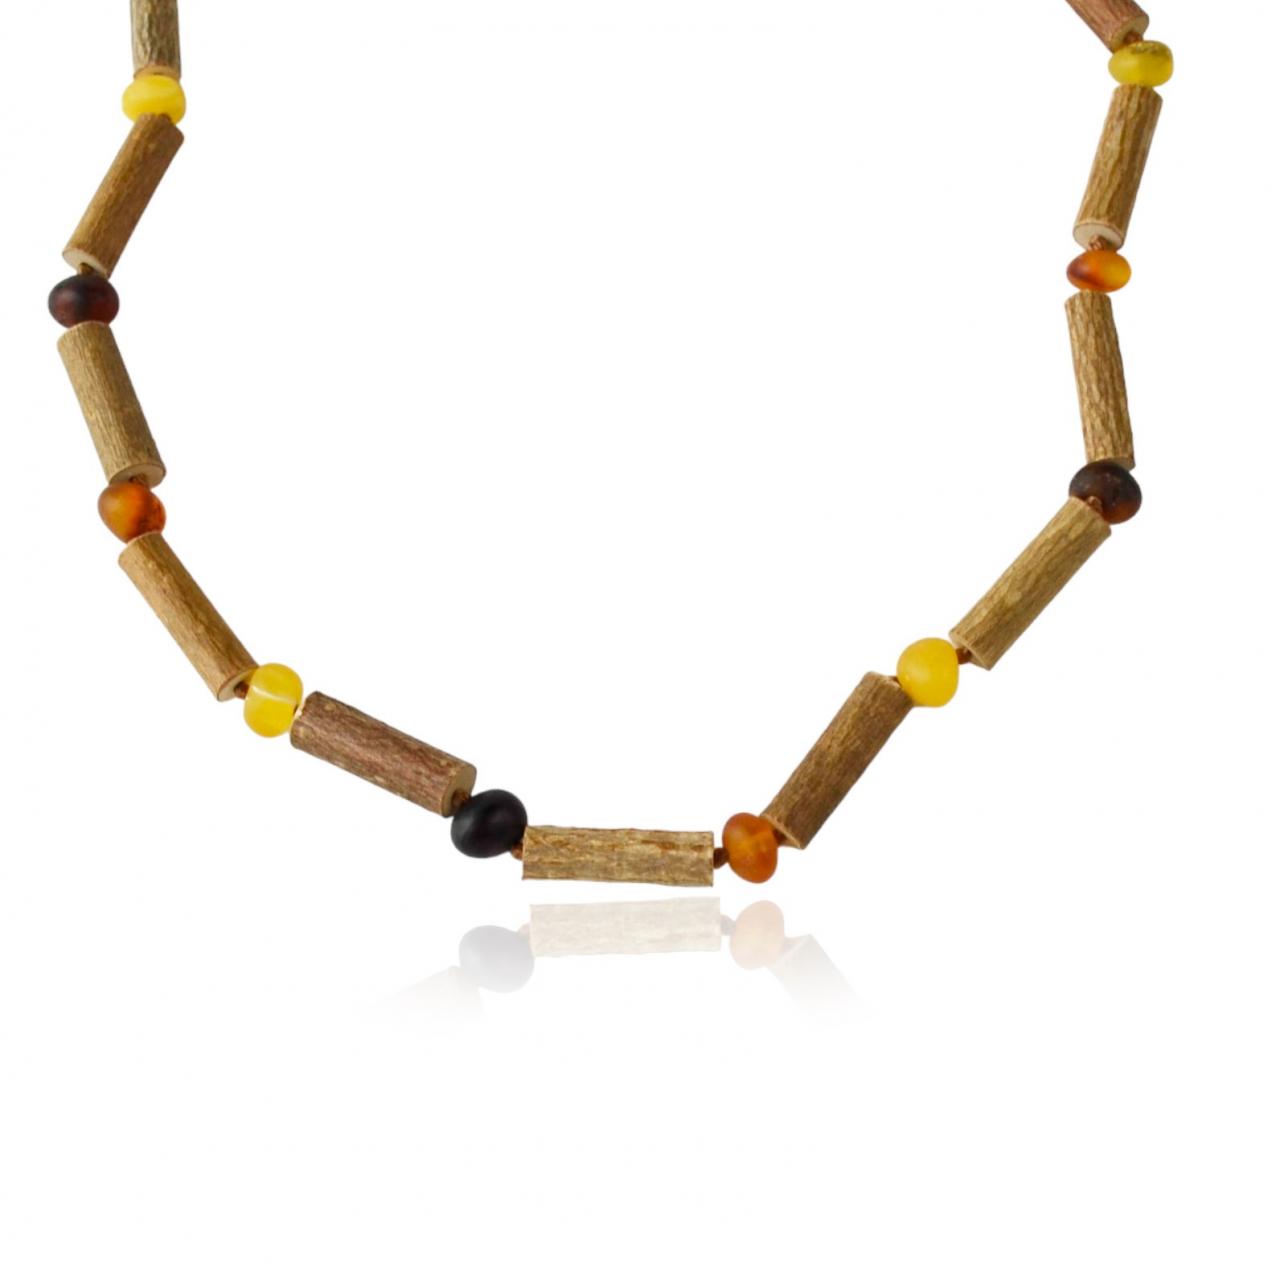 Baltic Amber Necklace For Adults: Men Or Women, Natural Amber Beads, Hazelwood + Amber Uk03